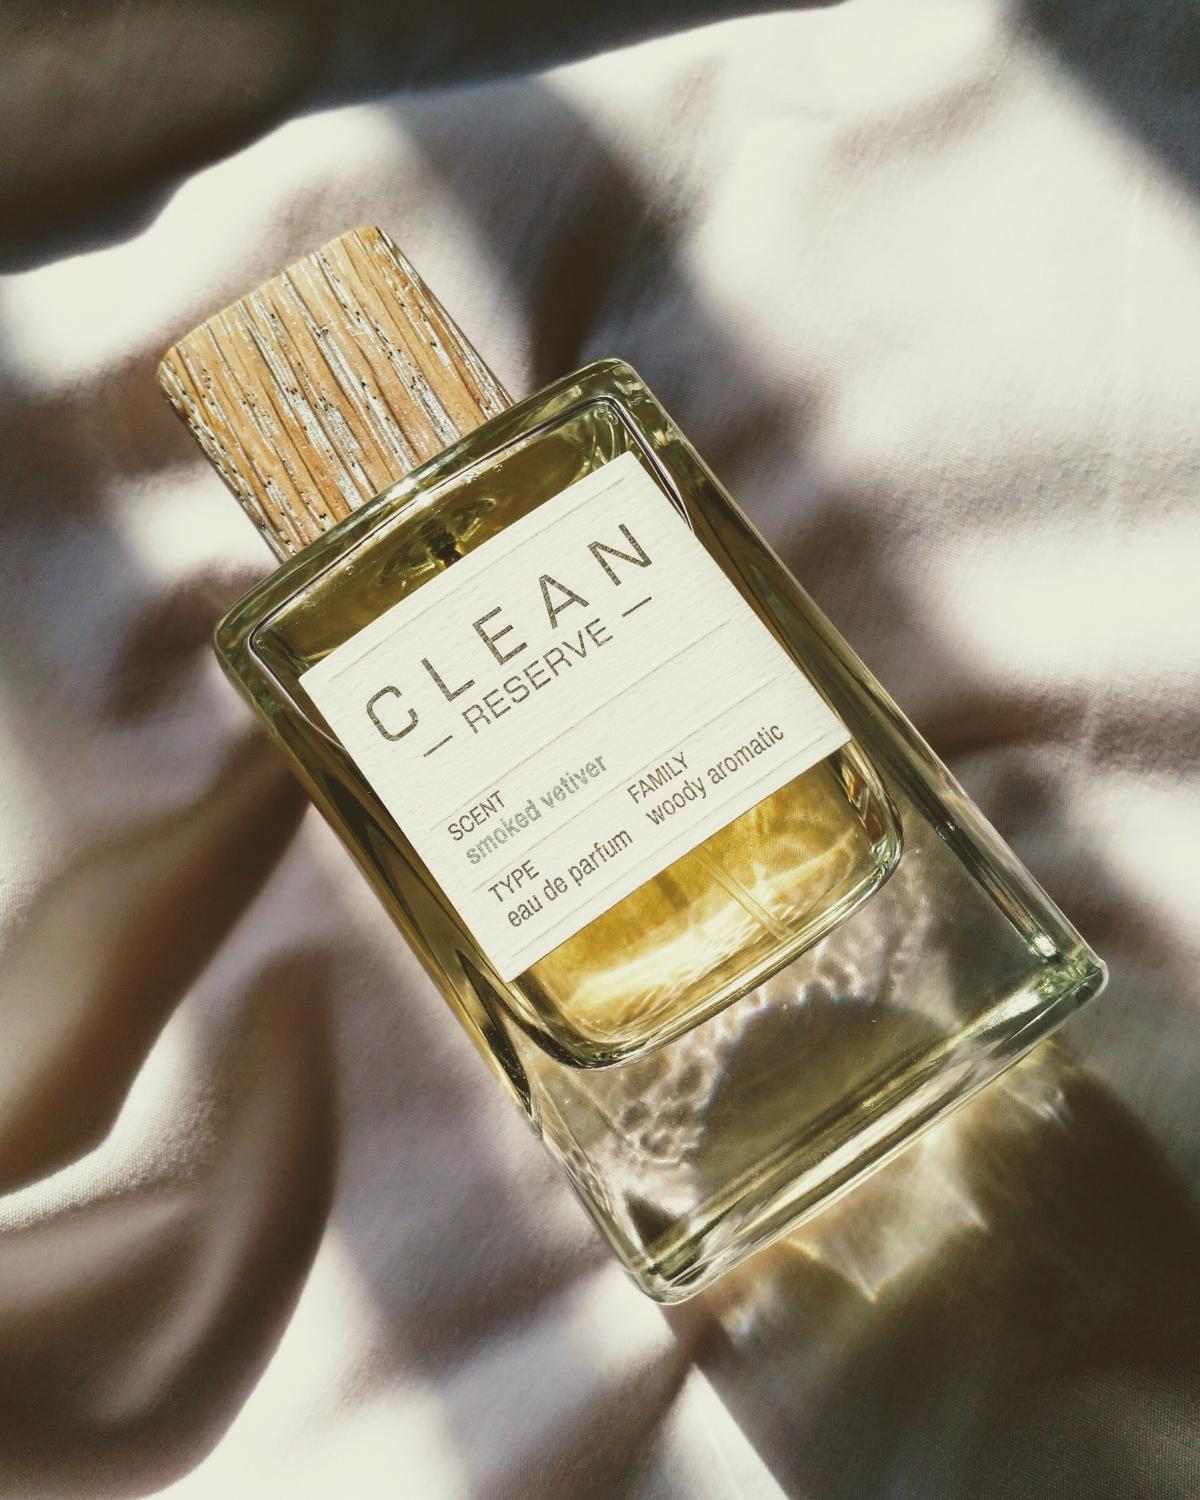 Smoked Vetiver Clean perfume - a fragrance for women and men 2016